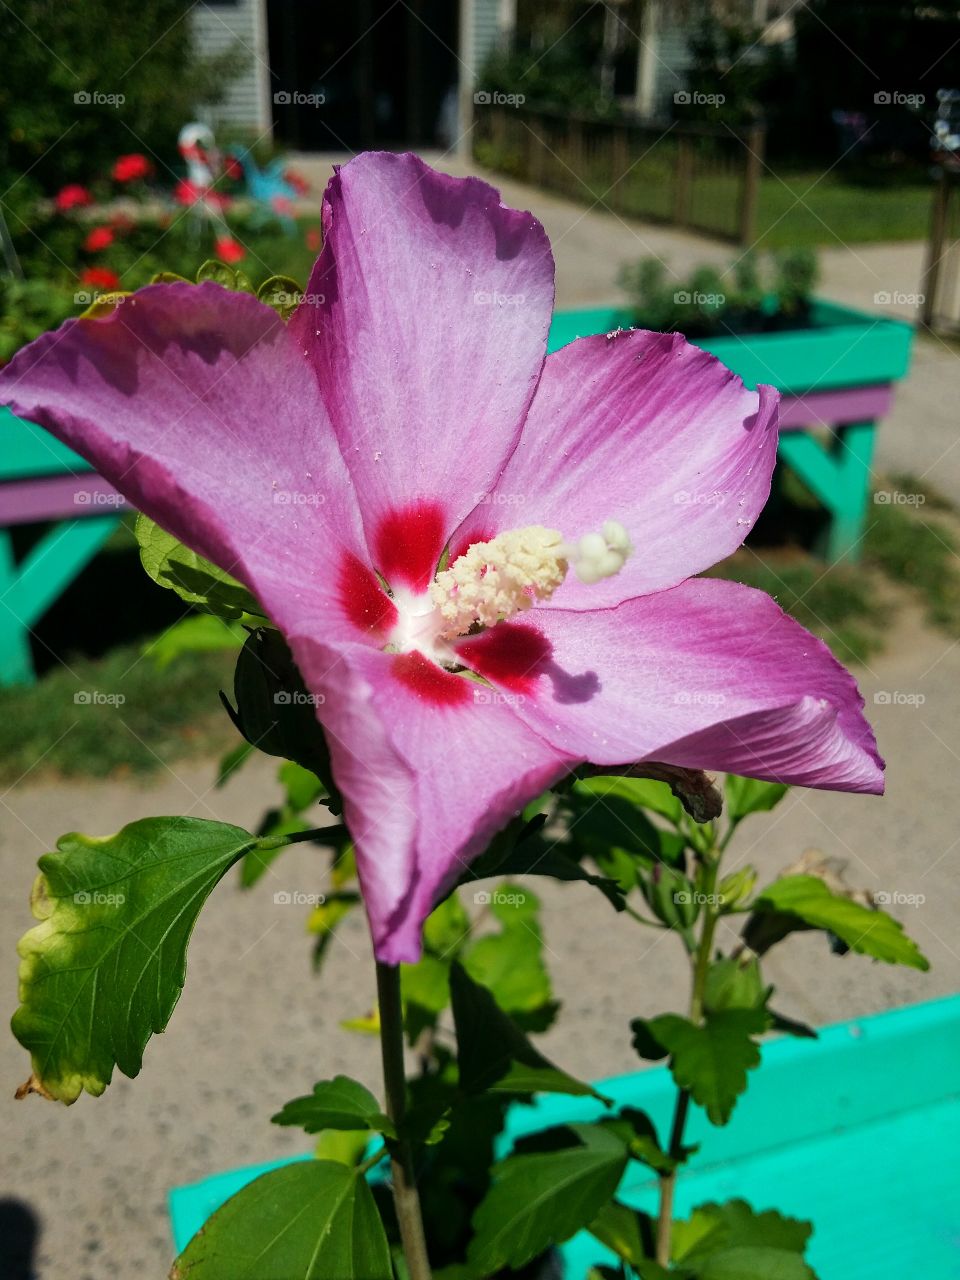 Pretty pink flower for sale at Jerome Garden in Bristol, Connecticut.